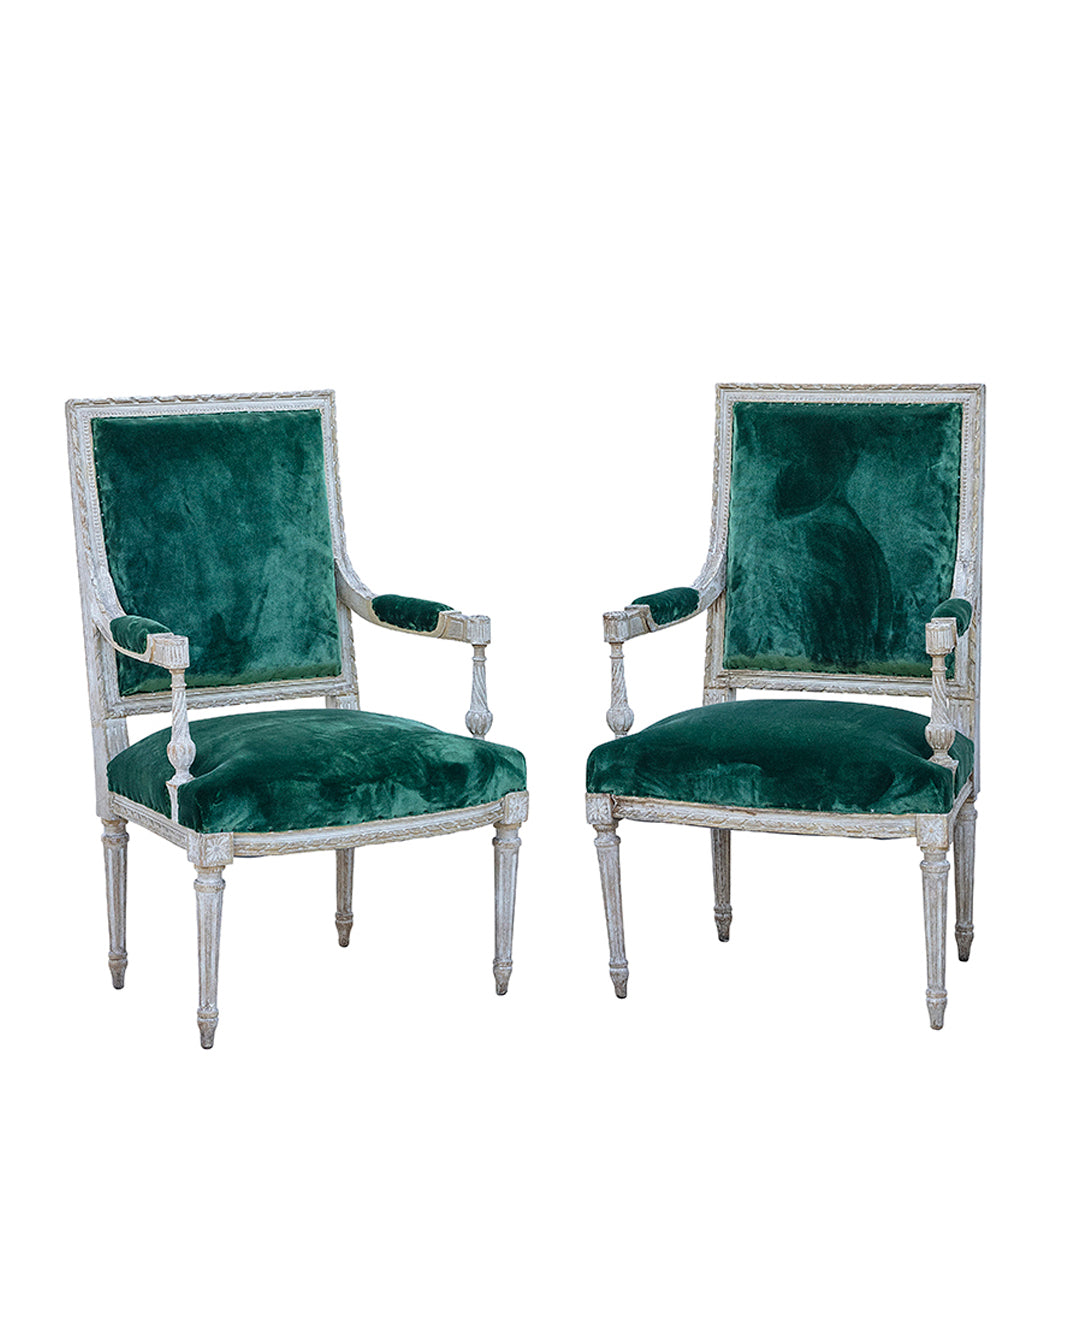 Pair of armchairs from the beginning of the directoire style. France 19th century